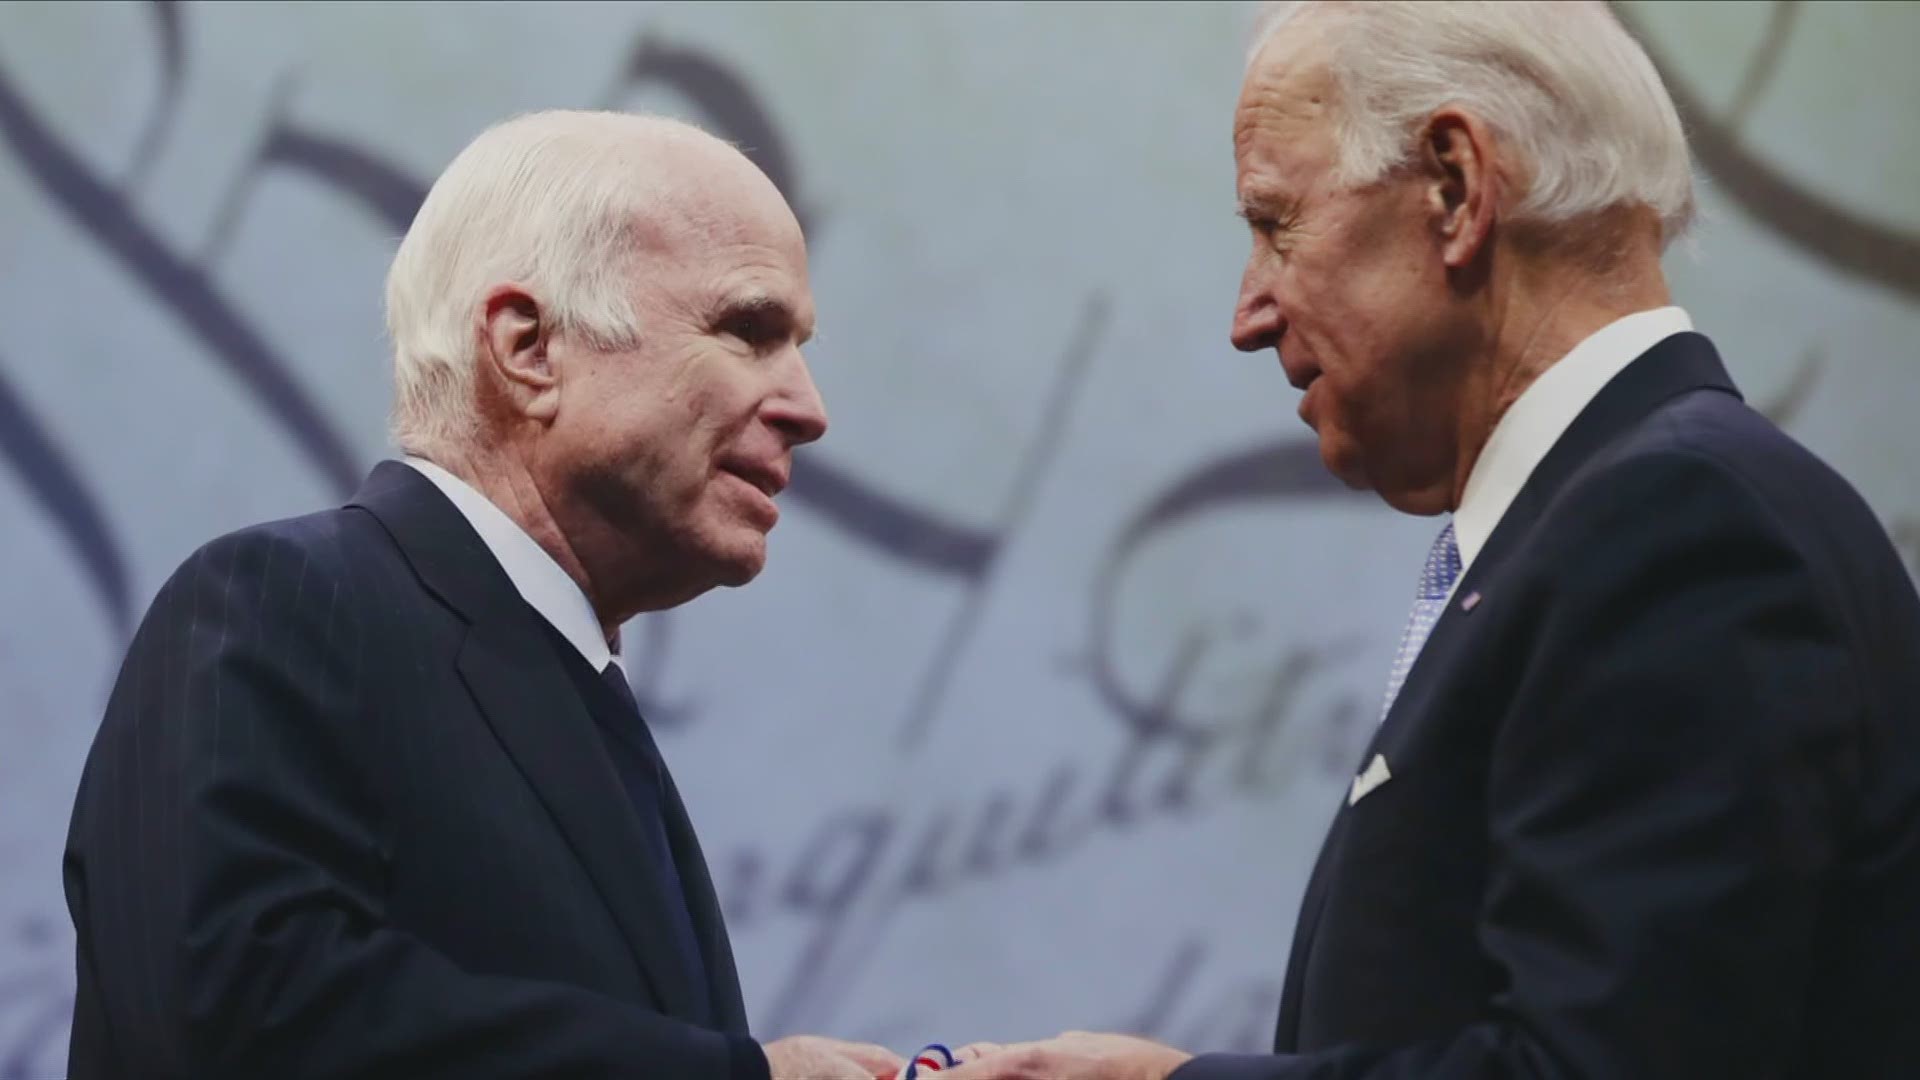 Cindy McCain is going to bat for Joe Biden, lending her voice to a video that aired during Tuesday night's Democratic National Convention.